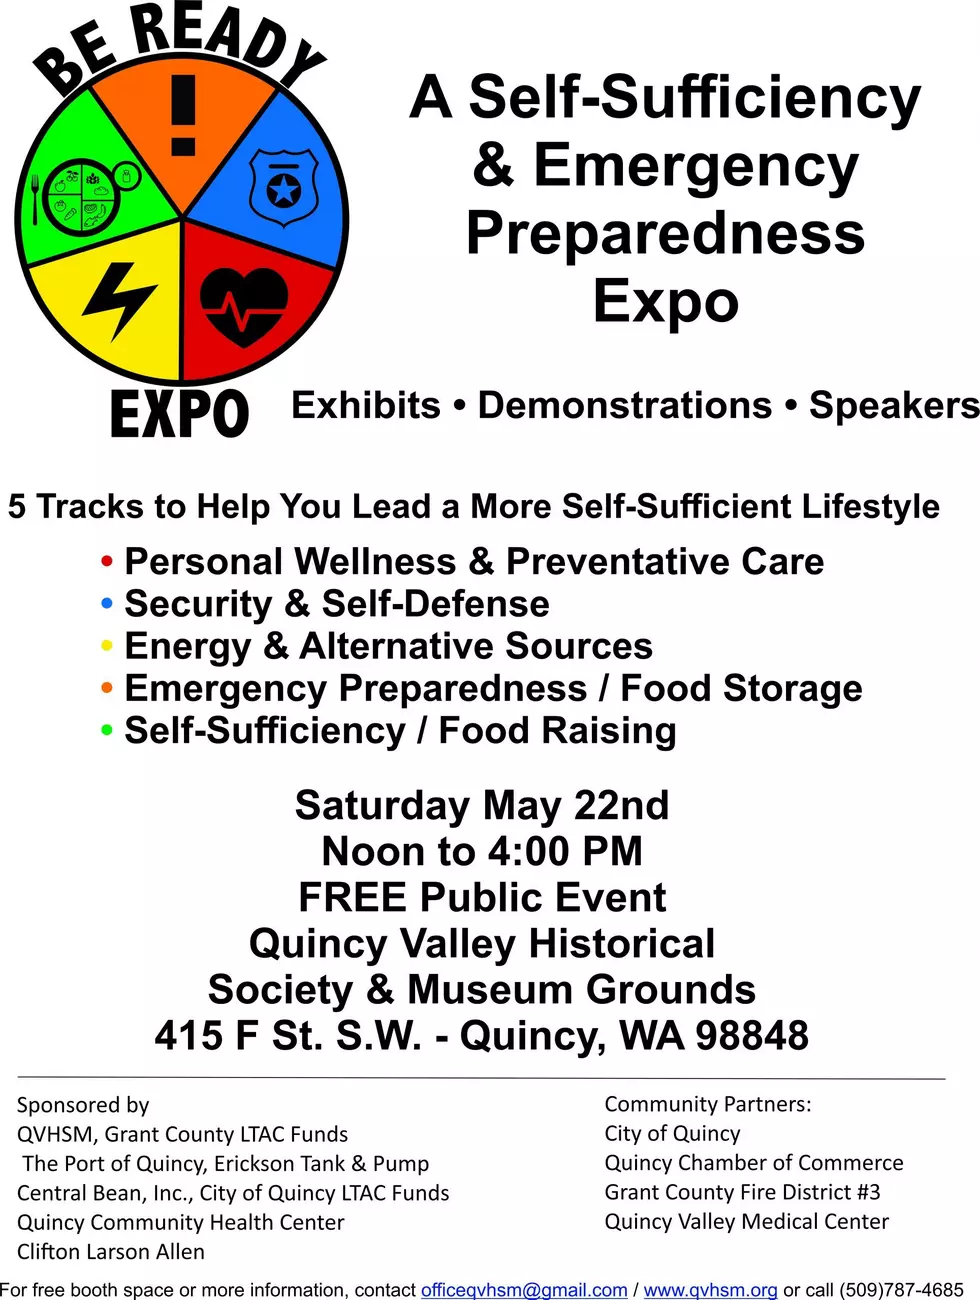 Almost 50 Exhibitors &#038; Experts Participate In Free&#8217;Be Ready Expo&#8217; at Quincy Valley Museum Grounds